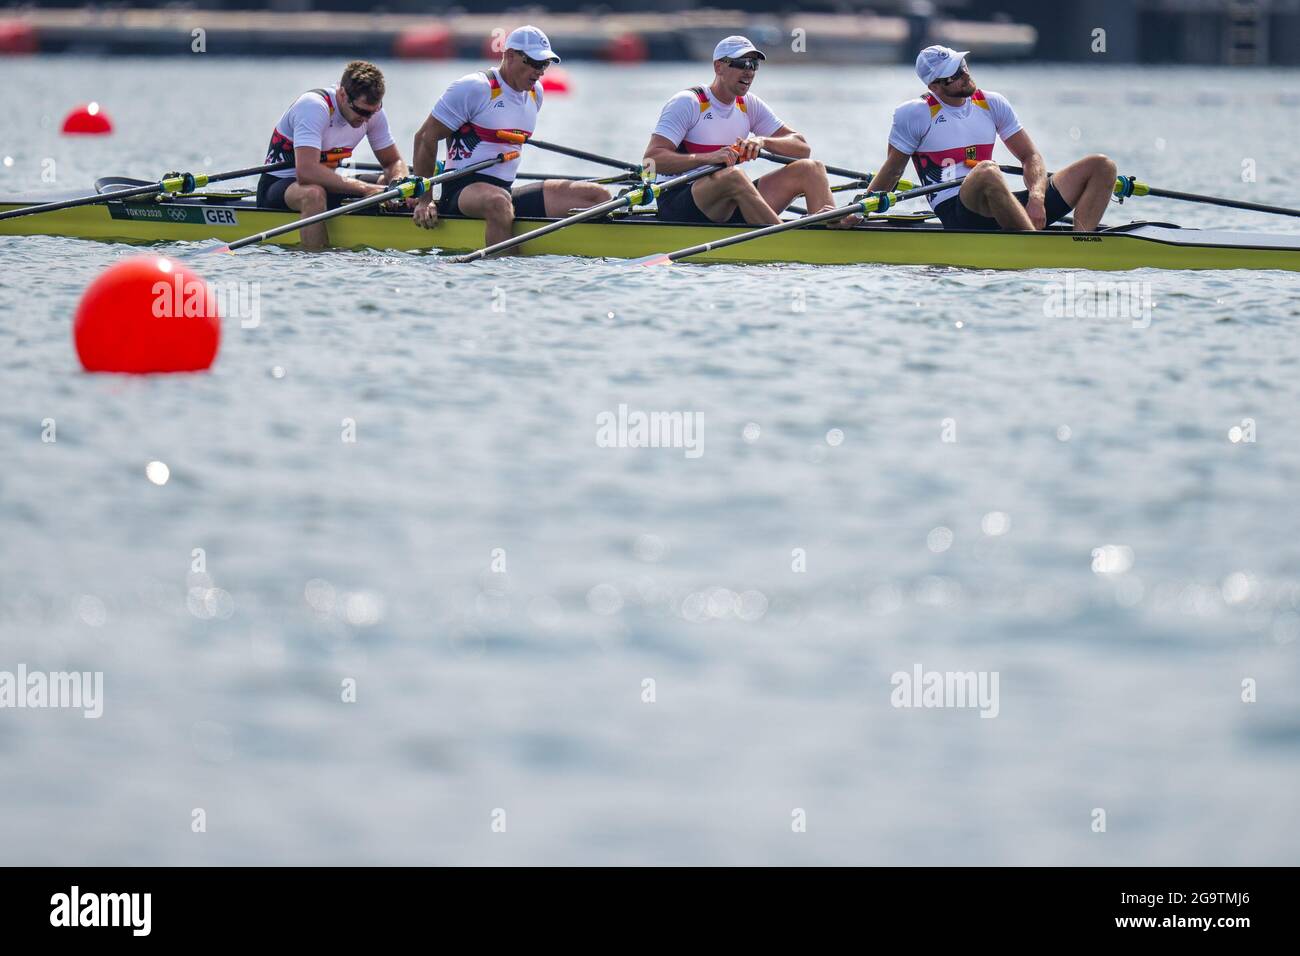 TOKYO, JAPAN - JULY 28: Tim Ole Naske, Karl Schulze, Hans Gruhne and Max Appel of Germany competing on Men's Quadruple Sculls Final B during the Tokyo 2020 Olympic Games at the Sea Forest Waterway on July 28, 2021 in Tokyo, Japan (Photo by Yannick Verhoeven/Orange Pictures) Stock Photo